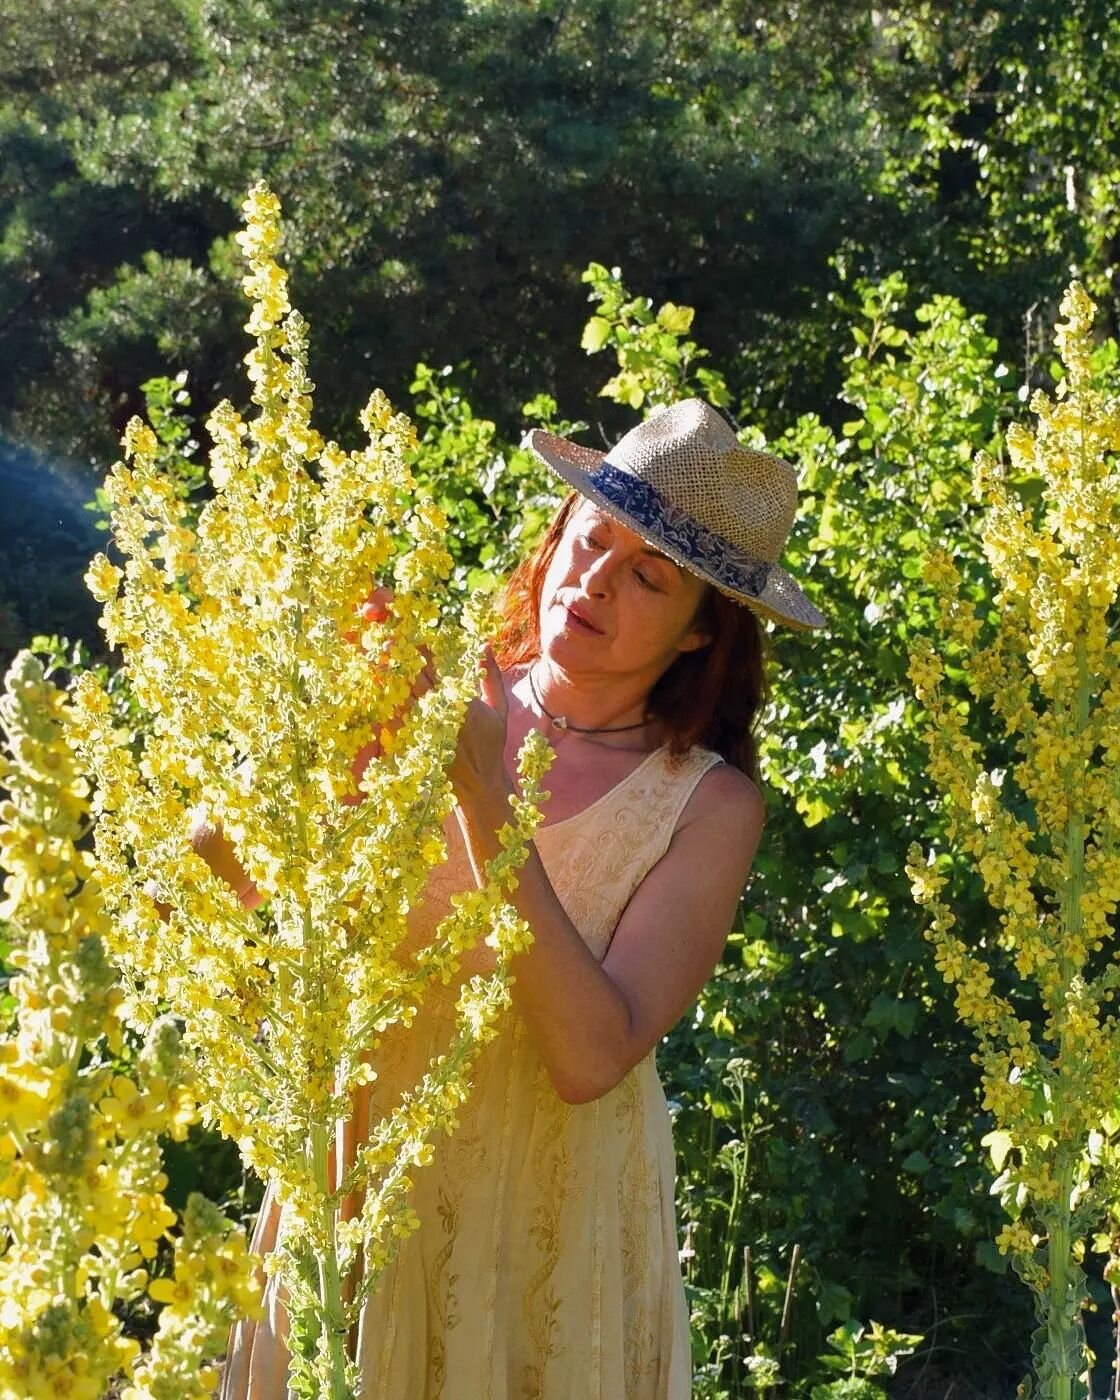 Beloved herbalist and teacher Stella with Mullein in flower. 🌿🌿 Stella will be offering our courses in Sweden soon, stay tuned loves! &hearts;️🌿